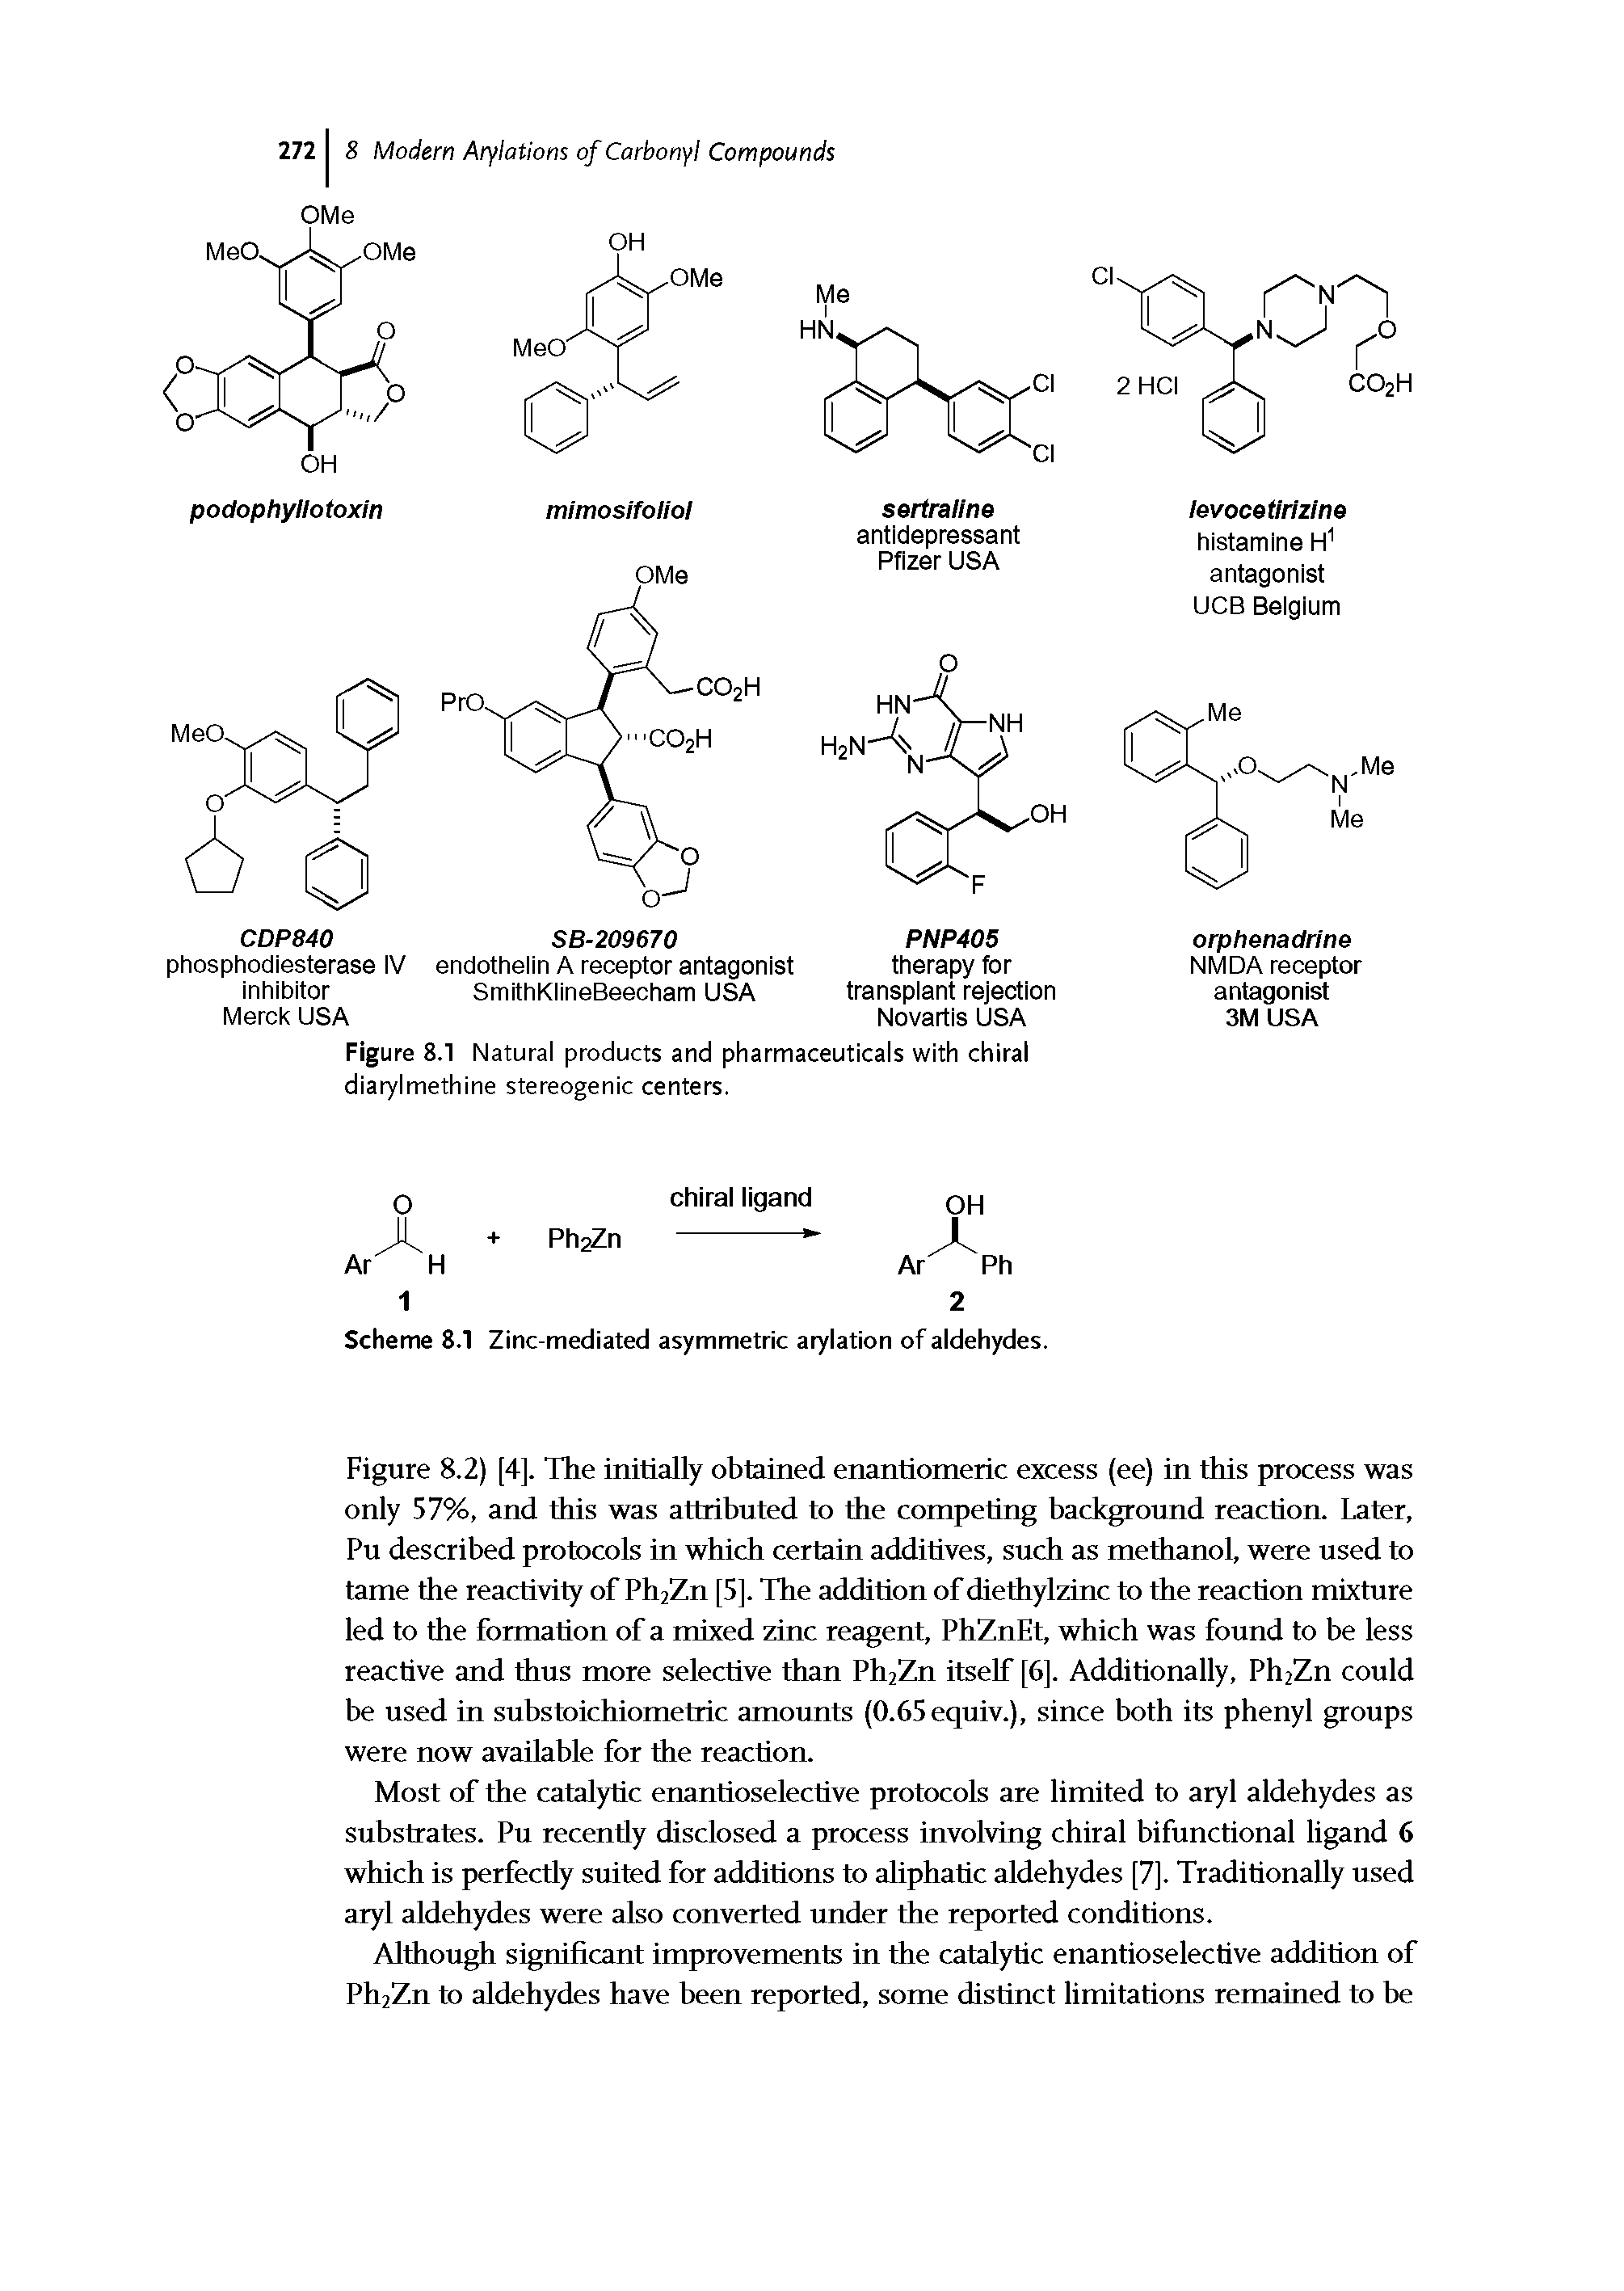 Figure 8.2) [4]. The initially obtained enantiomeric excess (ee) in this process was only 57%, and this was attributed to the competing background reaction. Later, Pu described protocols in which certain additives, such as methanol, were used to tame the reactivity of Ph2Zn [5]. The addition of diethylzinc to the reaction mixture led to the formation of a mixed zinc reagent, PhZnEt, which was found to be less reactive and thus more selective than Ph2Zn itself [6]. Additionally, Ph2Zn could be used in substoichiometric amounts (0.65equiv.), since both its phenyl groups were now available for the reaction.